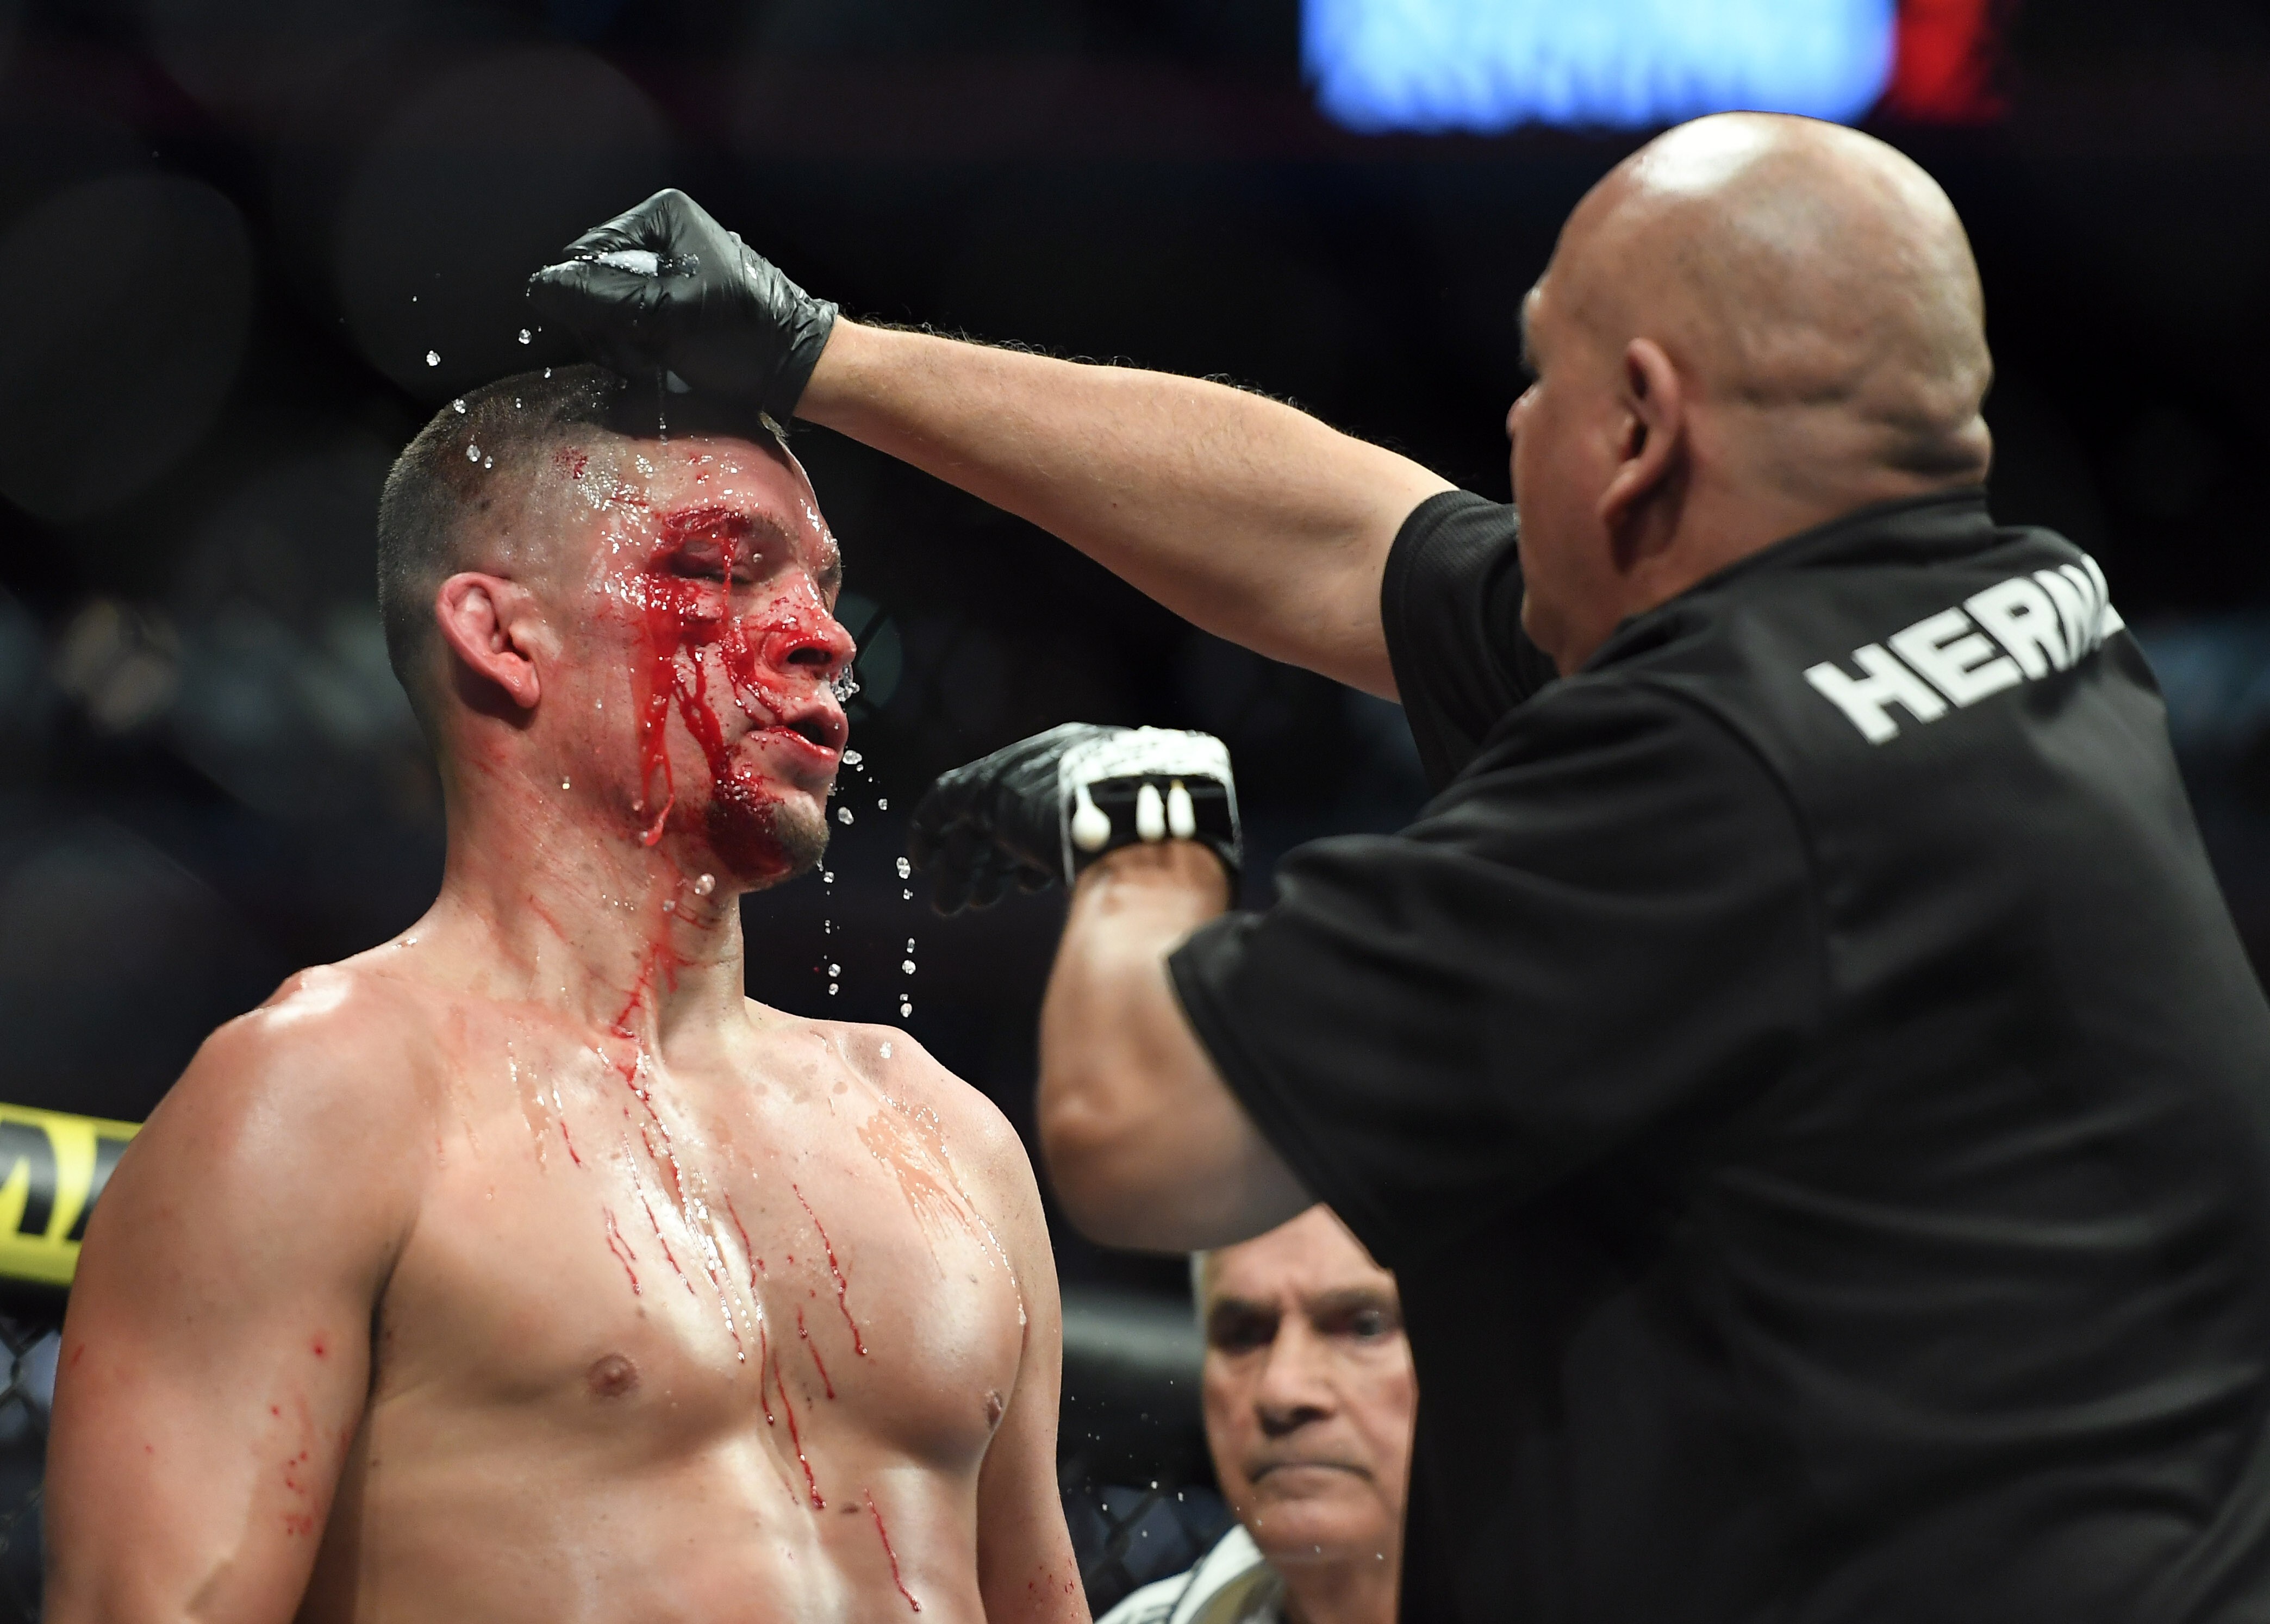 UFC welterweight Nate Diaz gets treatment from a doctor in his fight against Jorge Masvidal at UFC 244 in Madison Square Garden, New York in November of 2019. Photo: USA Today